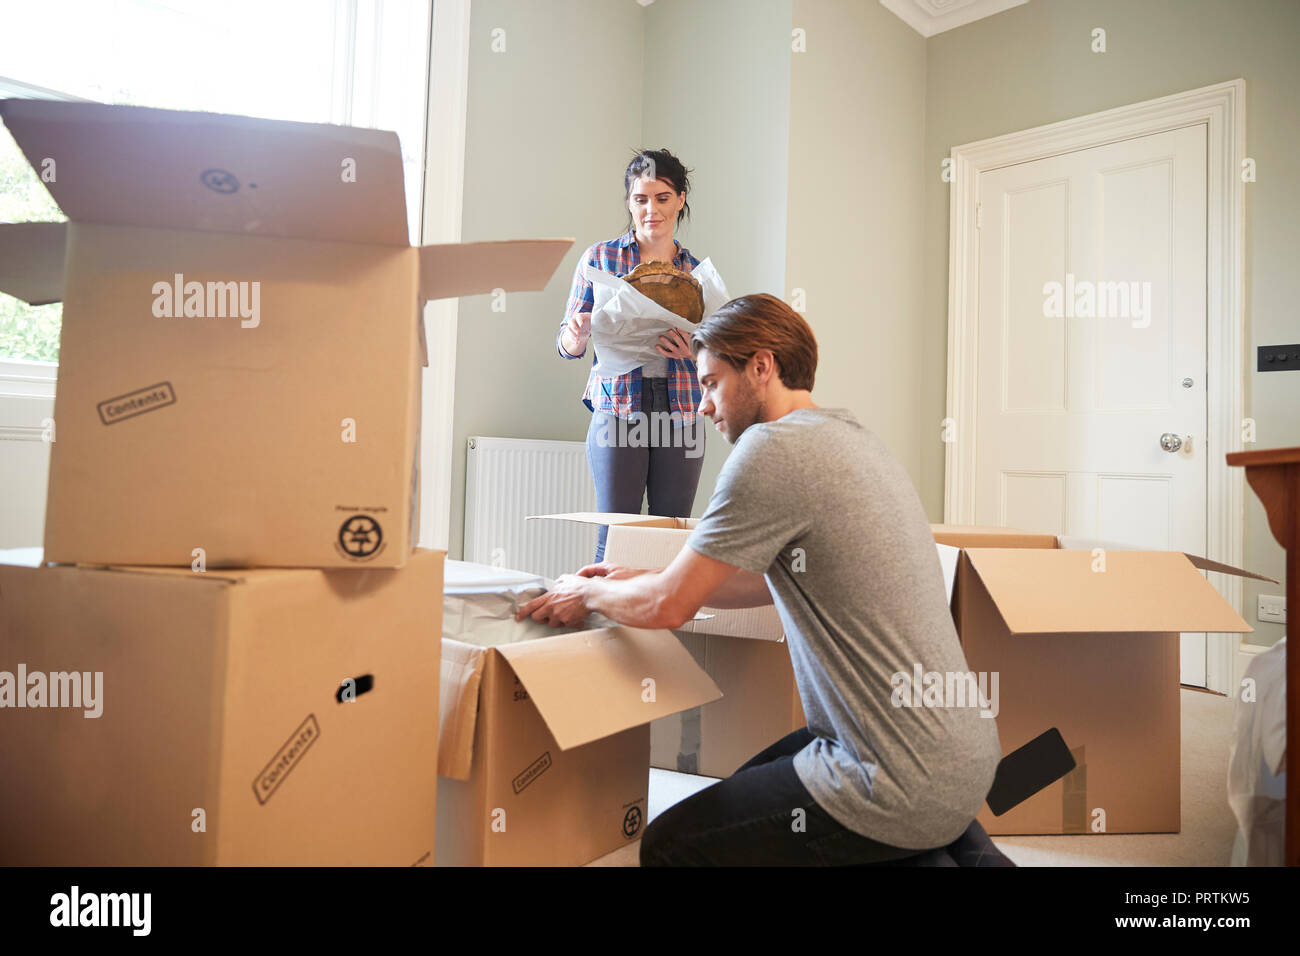 Couple packing belongings in cardboard boxes Stock Photo